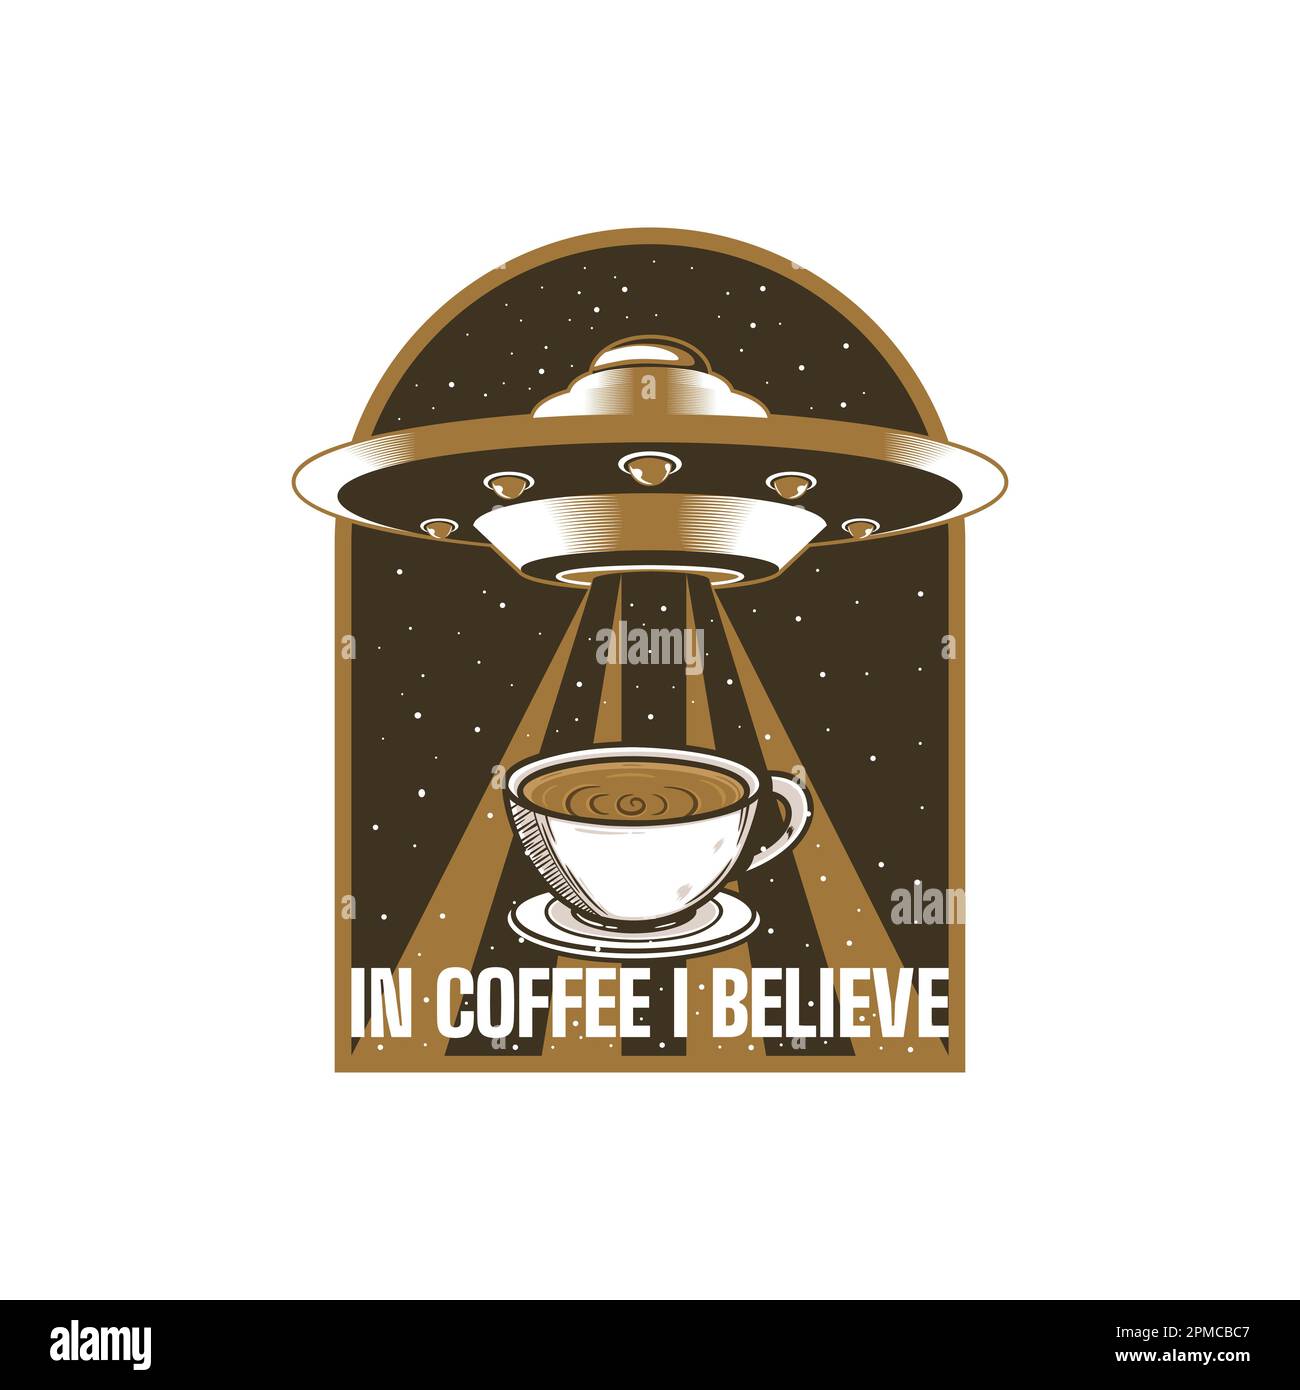 In Coffee I Believe, Coffee Typography Quote Design for T-Shirt, Mug, Poster or Other Merchandise. Stock Vector